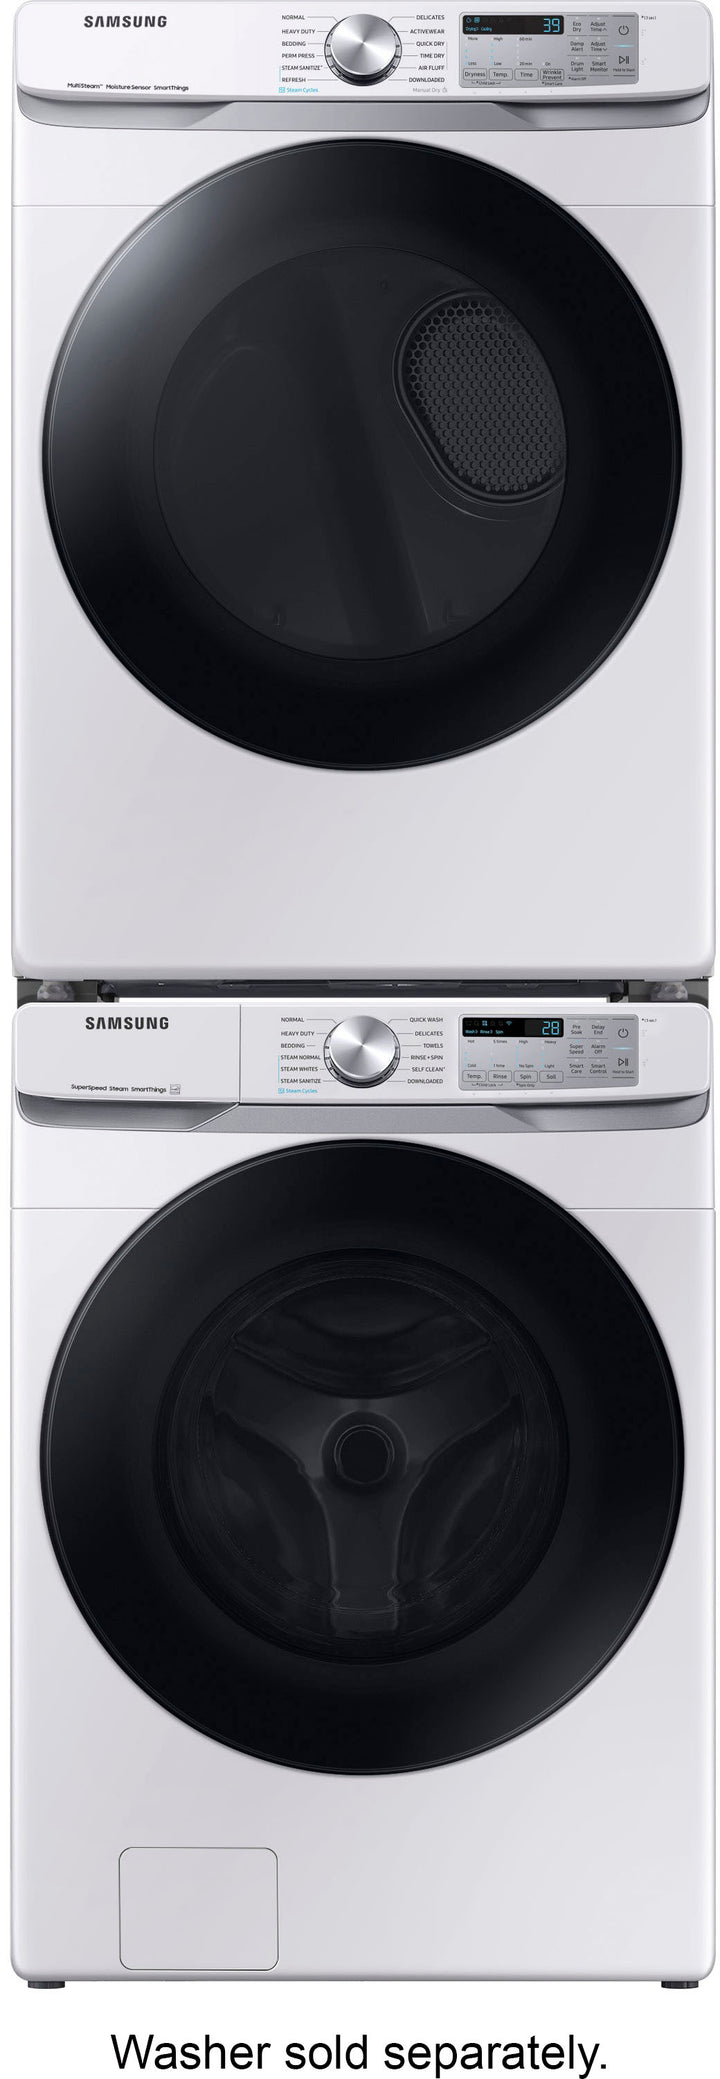 Samsung - 7.5 cu. ft. Smart Electric Dryer with Steam Sanitize+ - White_12